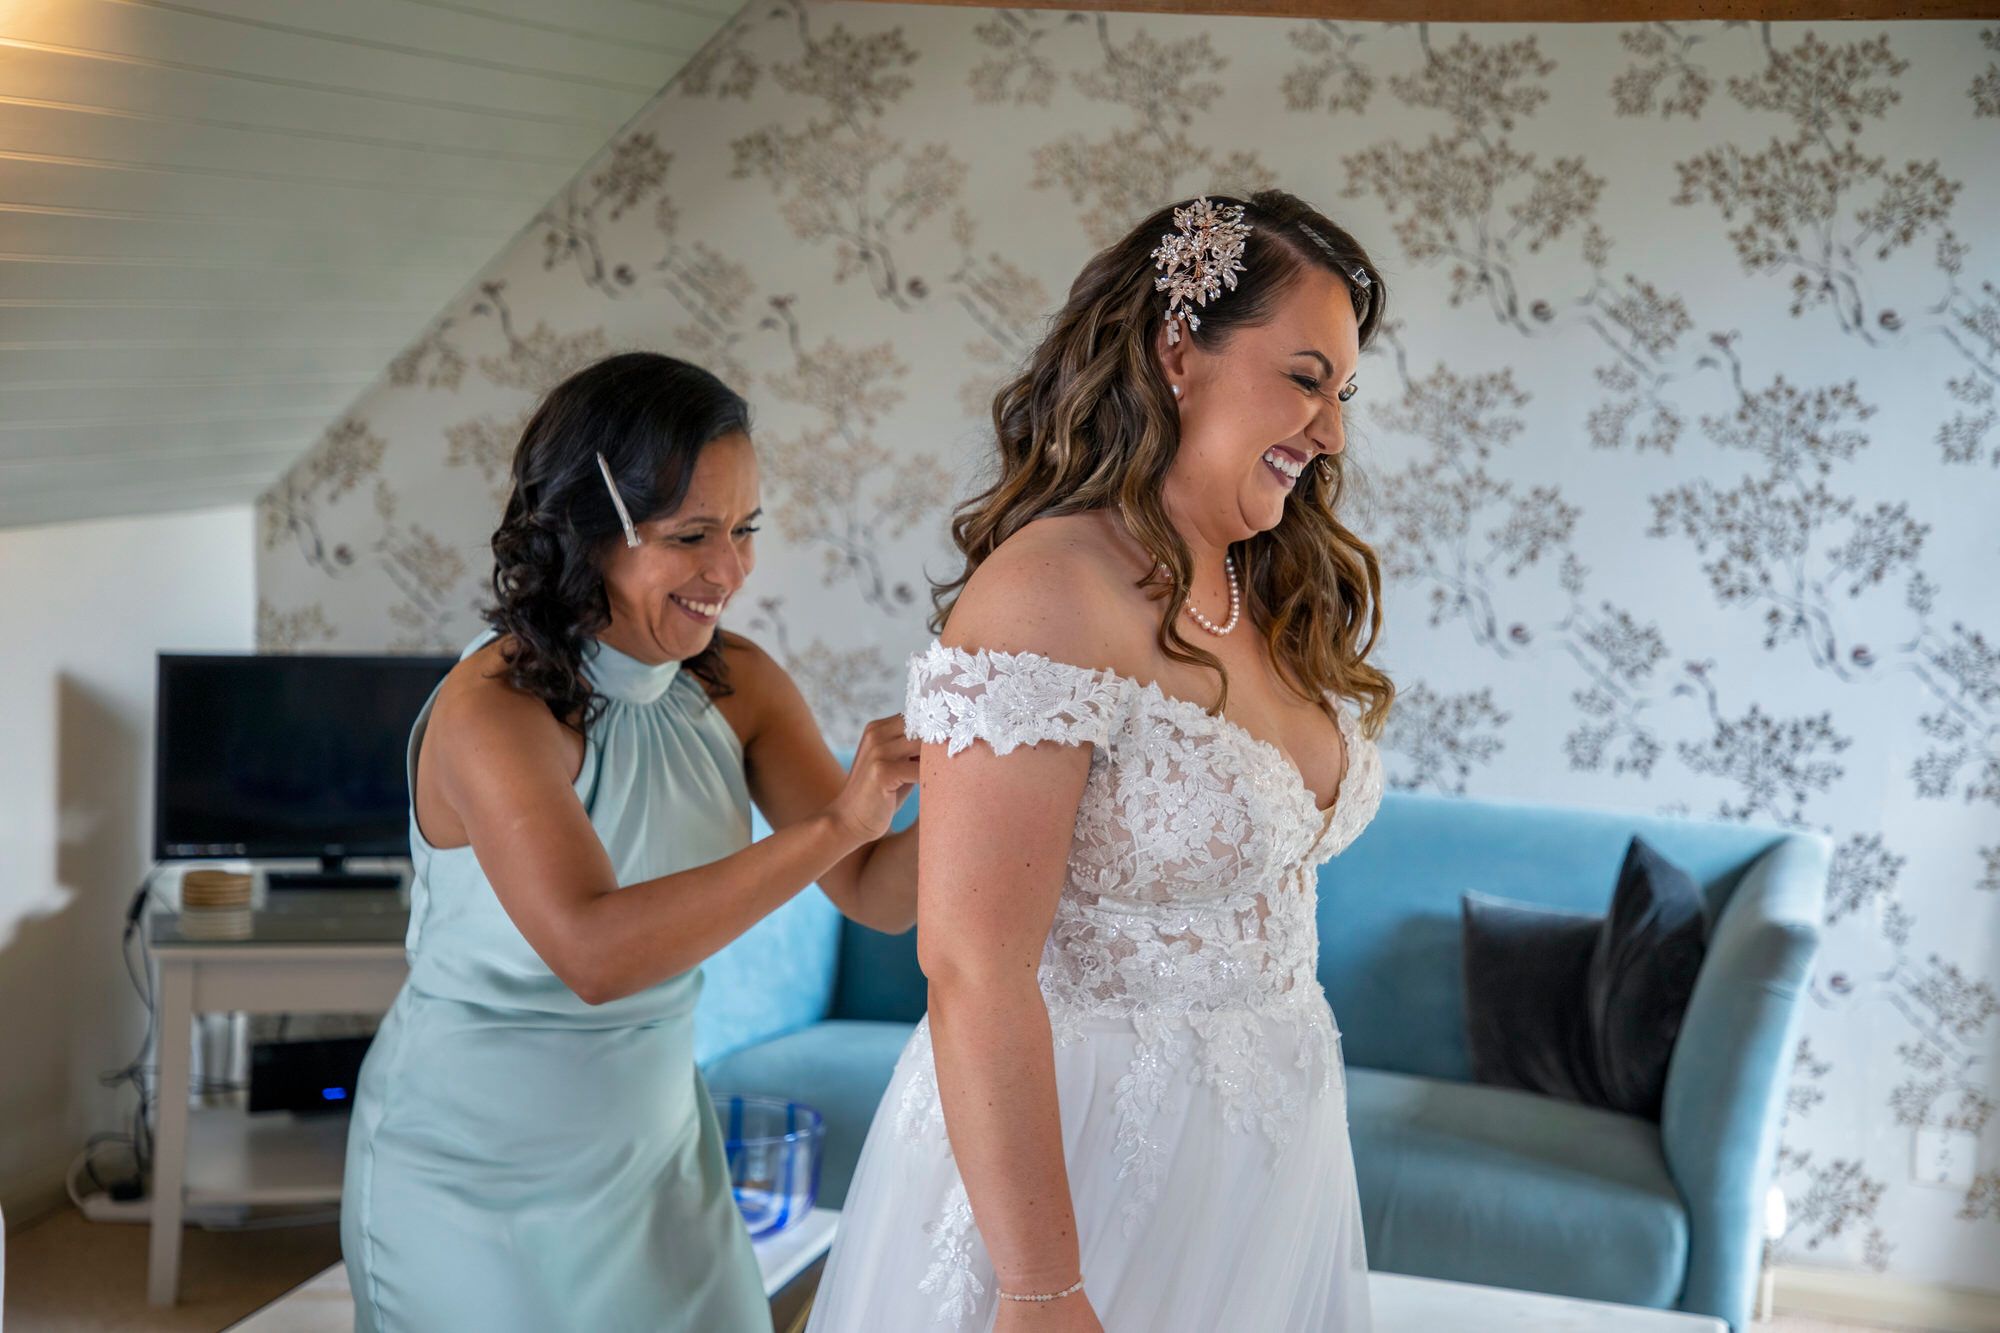 Joanna's bridesmaid securing her wedding dress upstairs in the Coach House Suite at South Farm. Both ladies are smiling, very excited in the moment. Photo thanks to Nigel Charman Photography. 